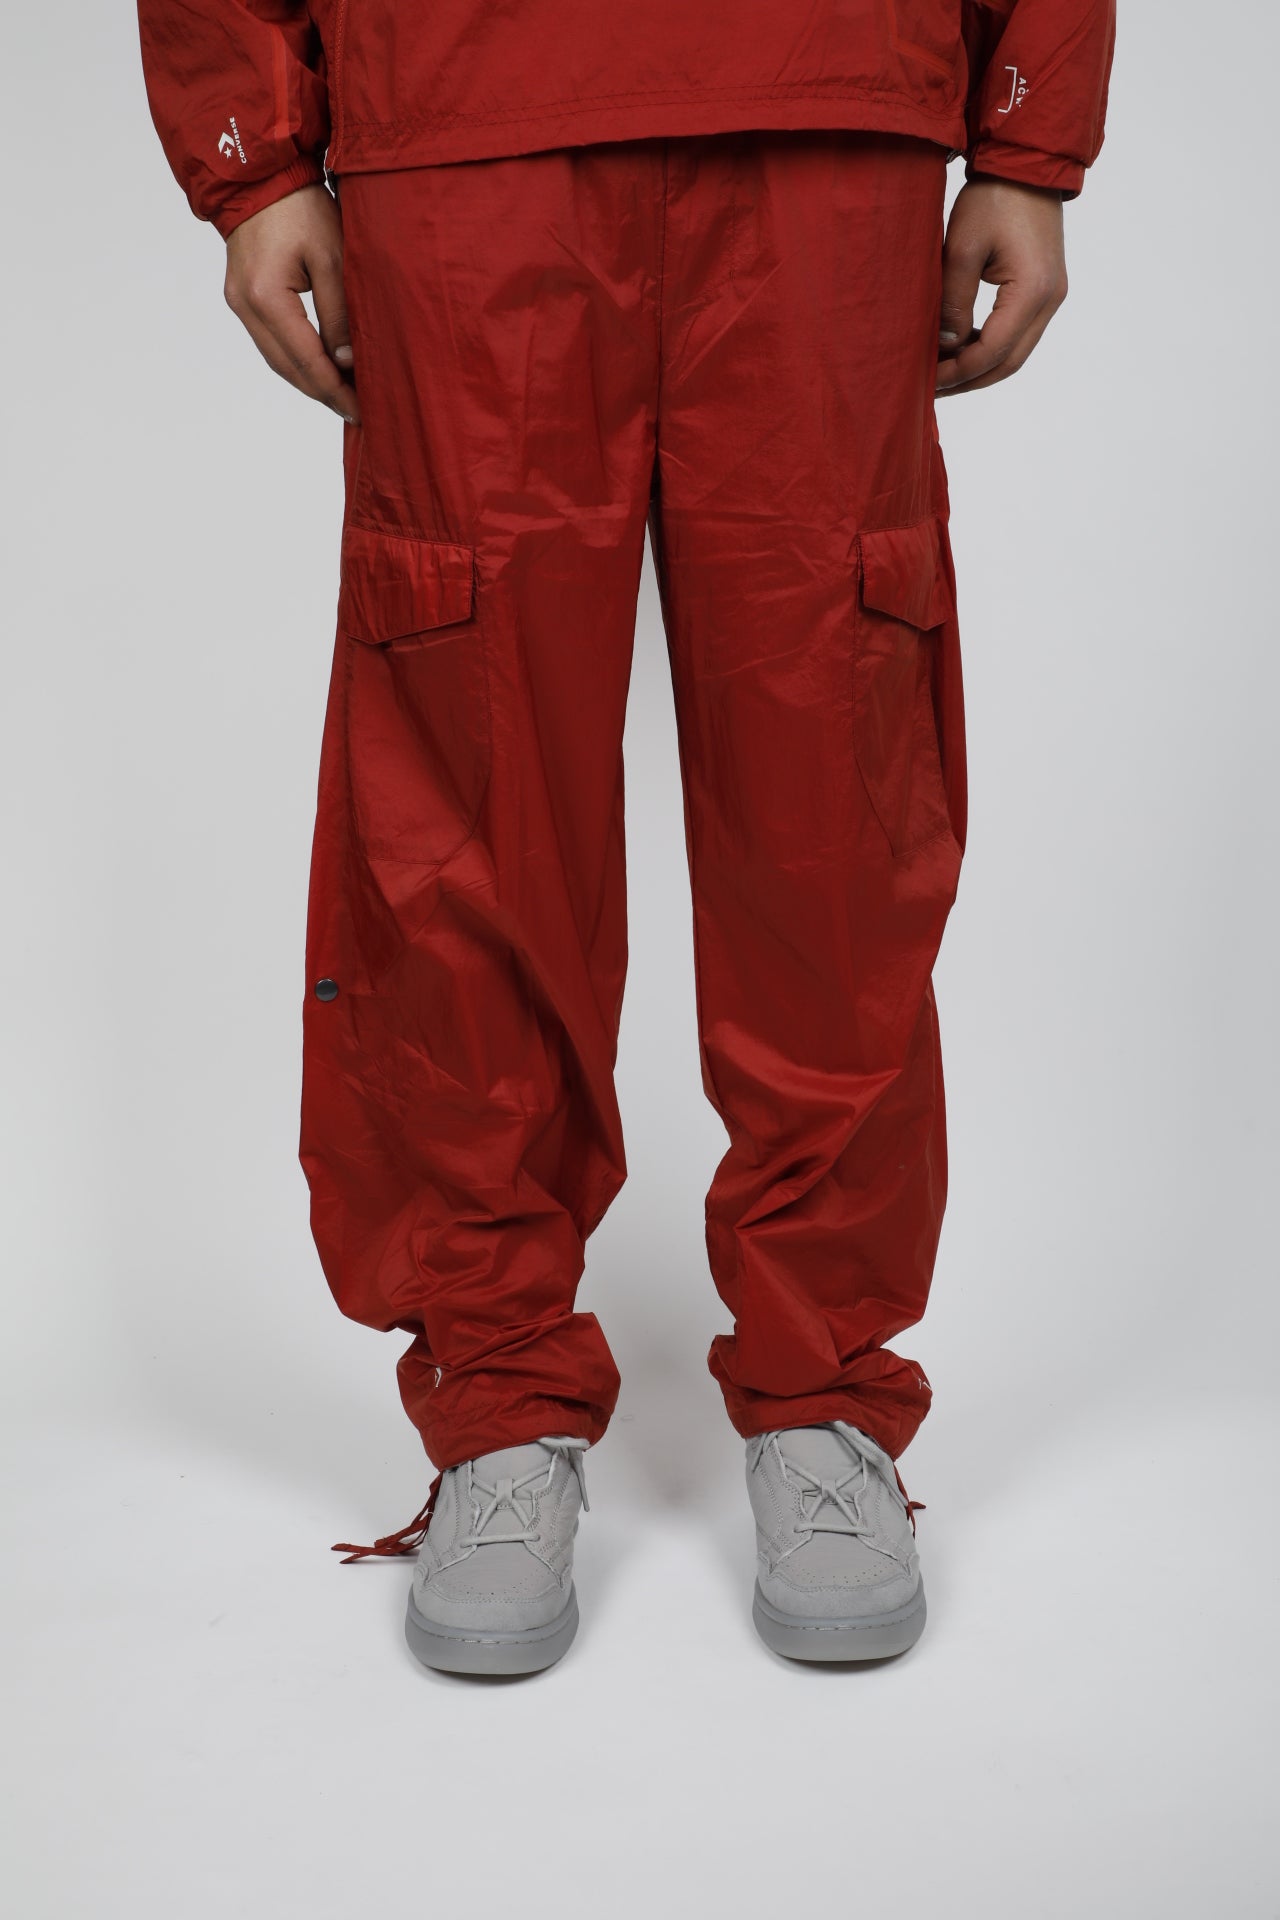 CONVERSE x A-COLD-WALL* GALE PANT